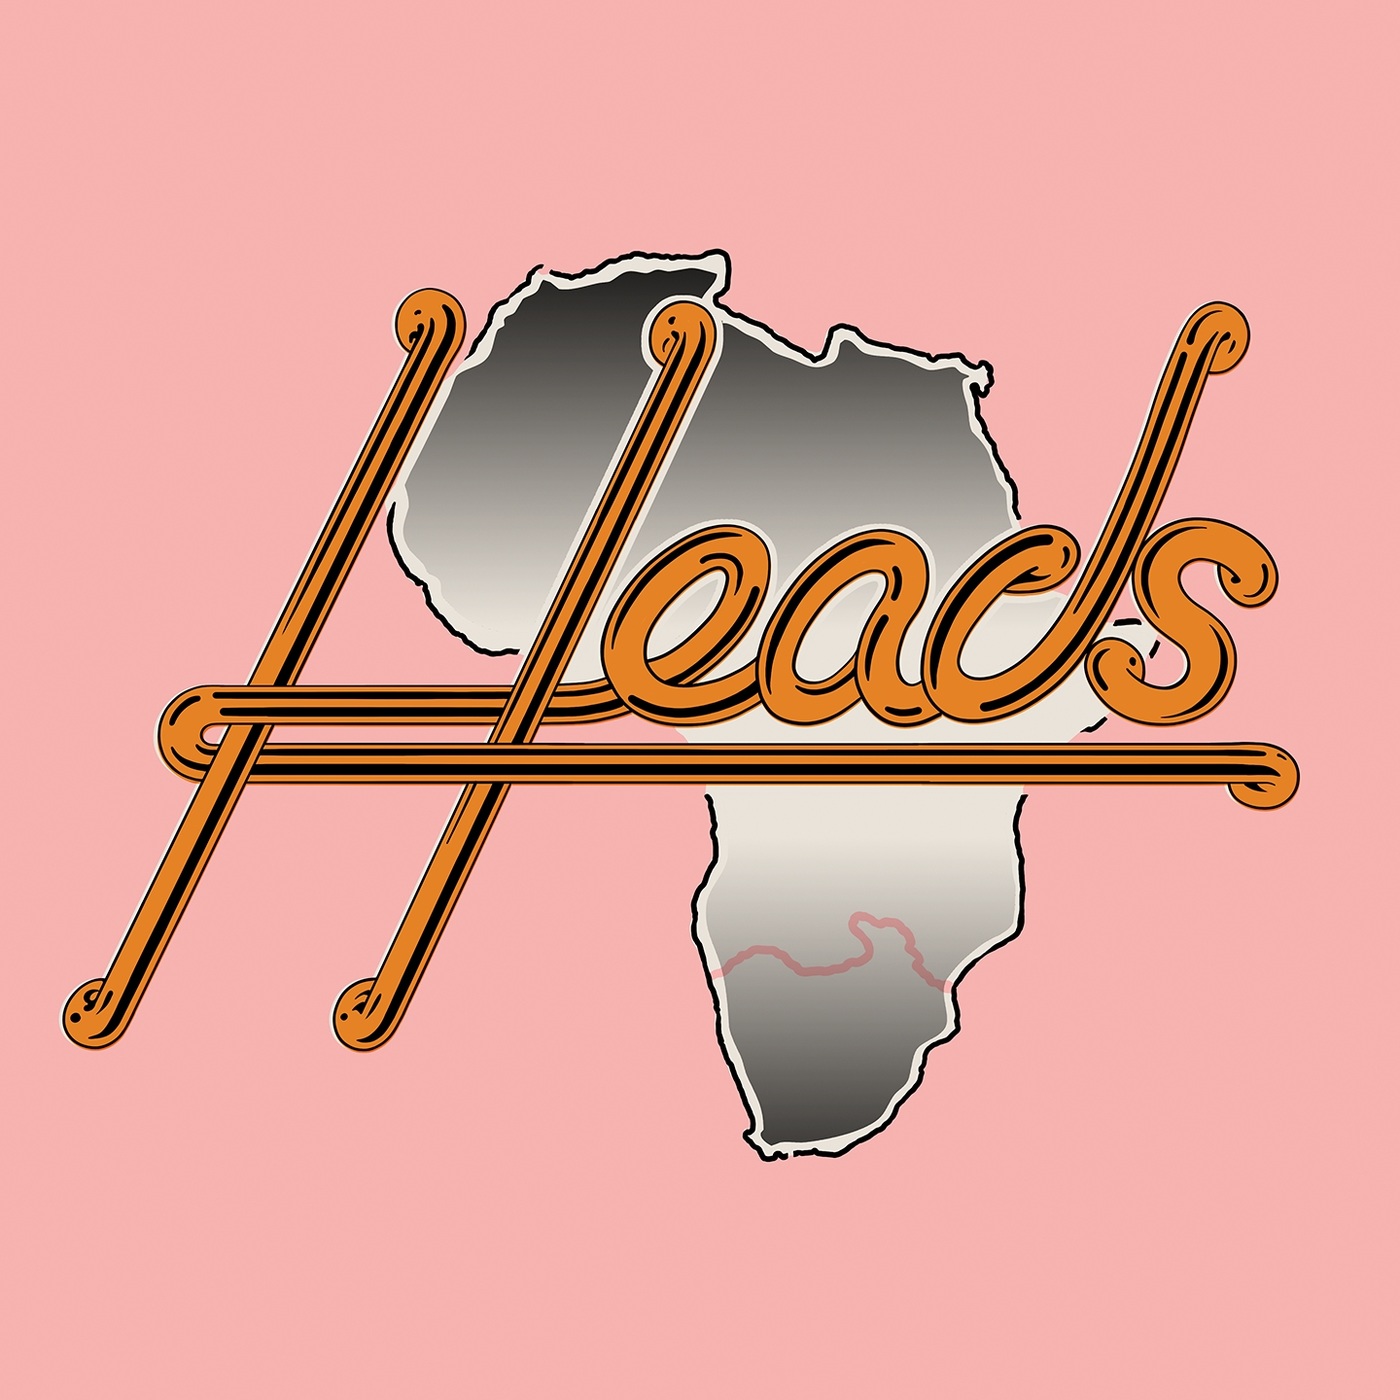 VA - Heads Records - South African Disco-Dub Edits / Soundway Records